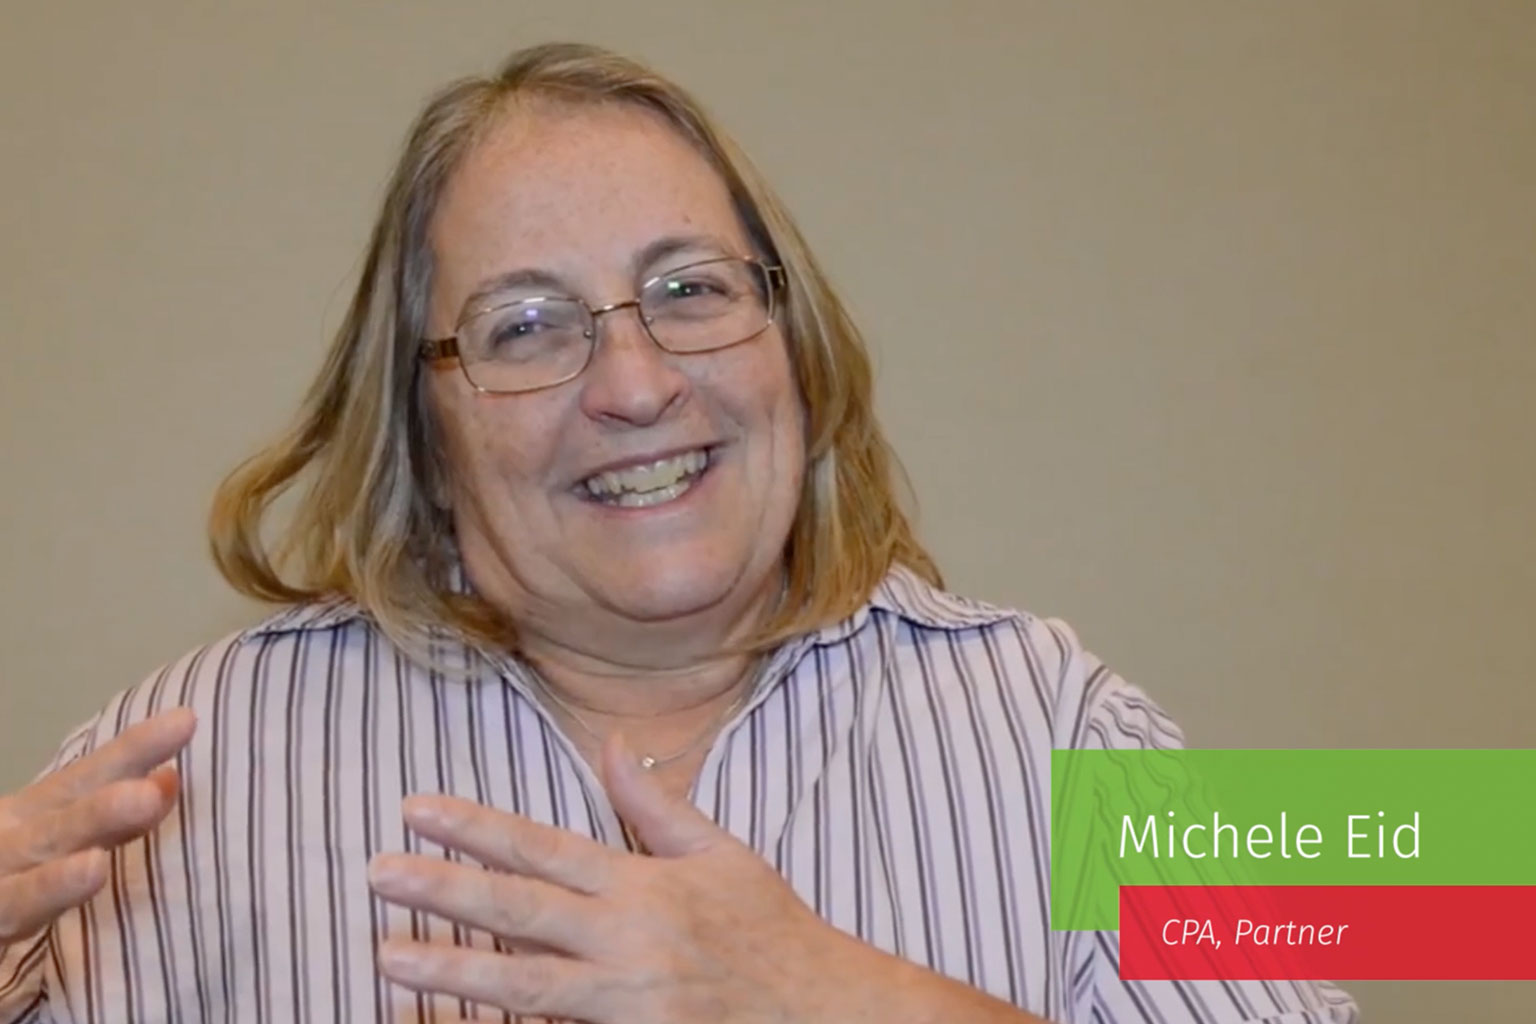 cch-answerconnect-video-testimonial-michele-eid-1536x1024